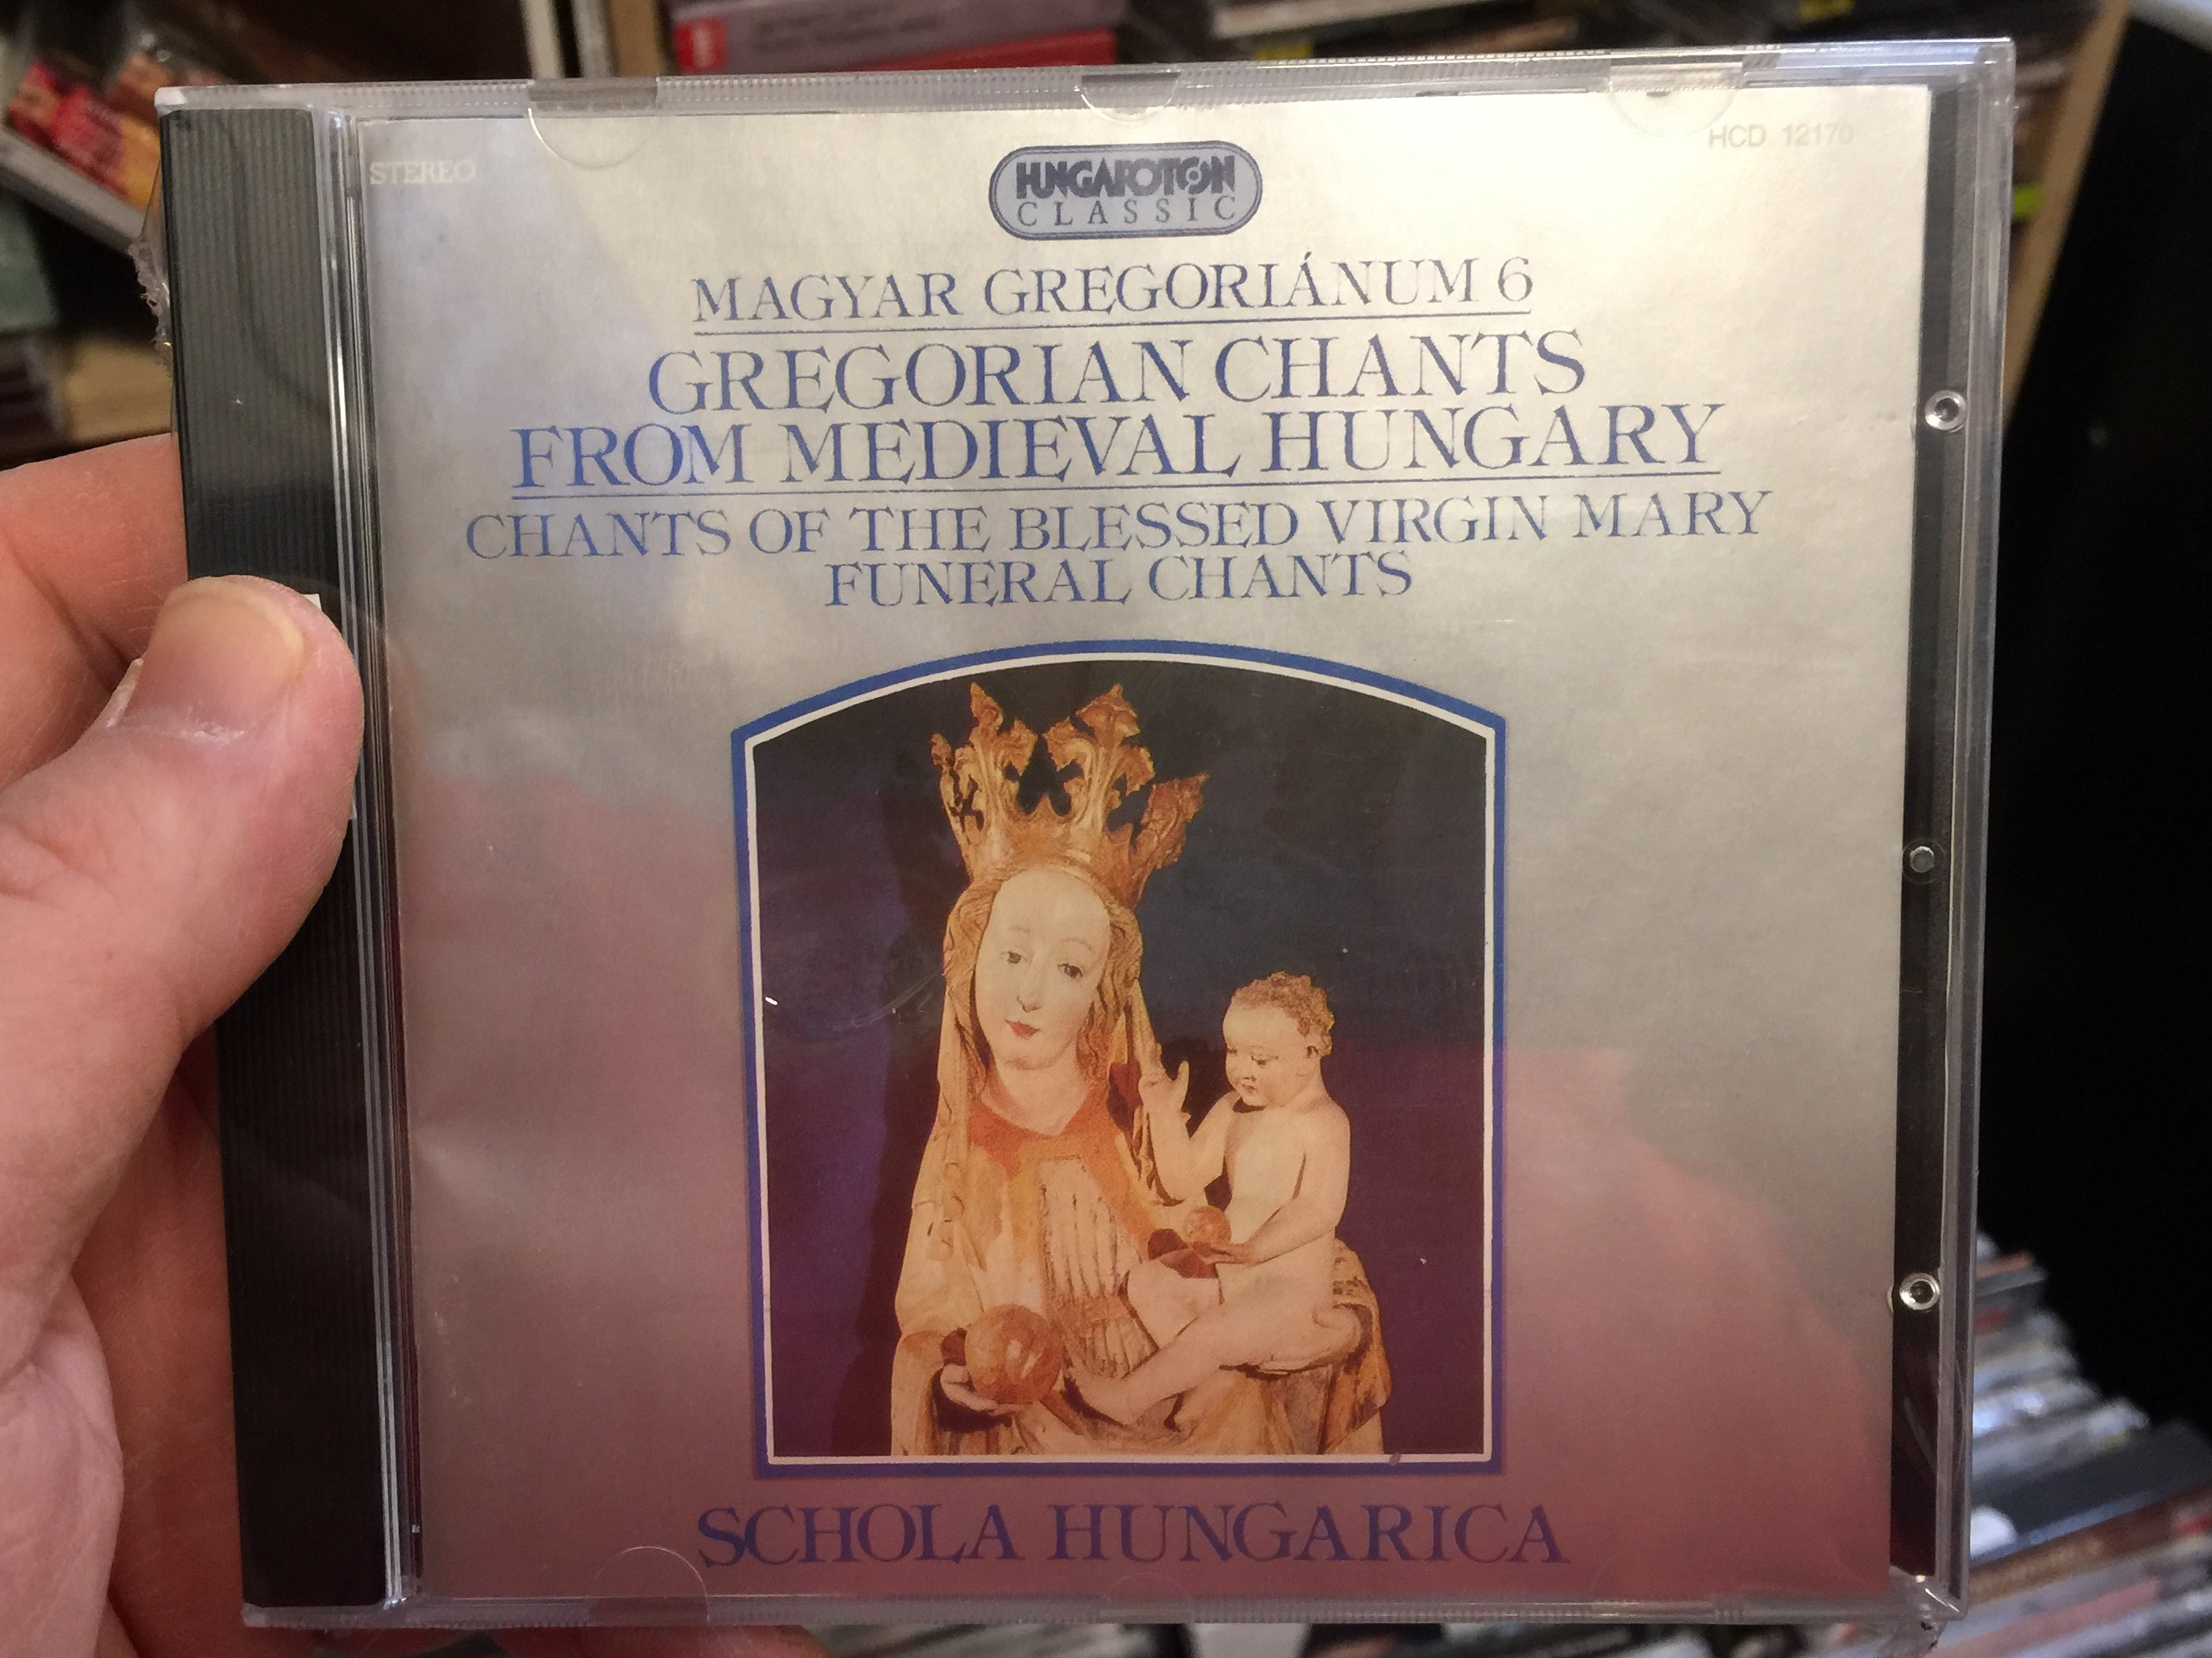 magyar-gregori-num-6-gregorian-chants-from-medieval-hungary-chants-of-the-blessed-virgin-mary-funeral-chants-schola-hungarica-hungaroton-classic-audio-cd-1994-stereo-hcd-12170-1-.jpg